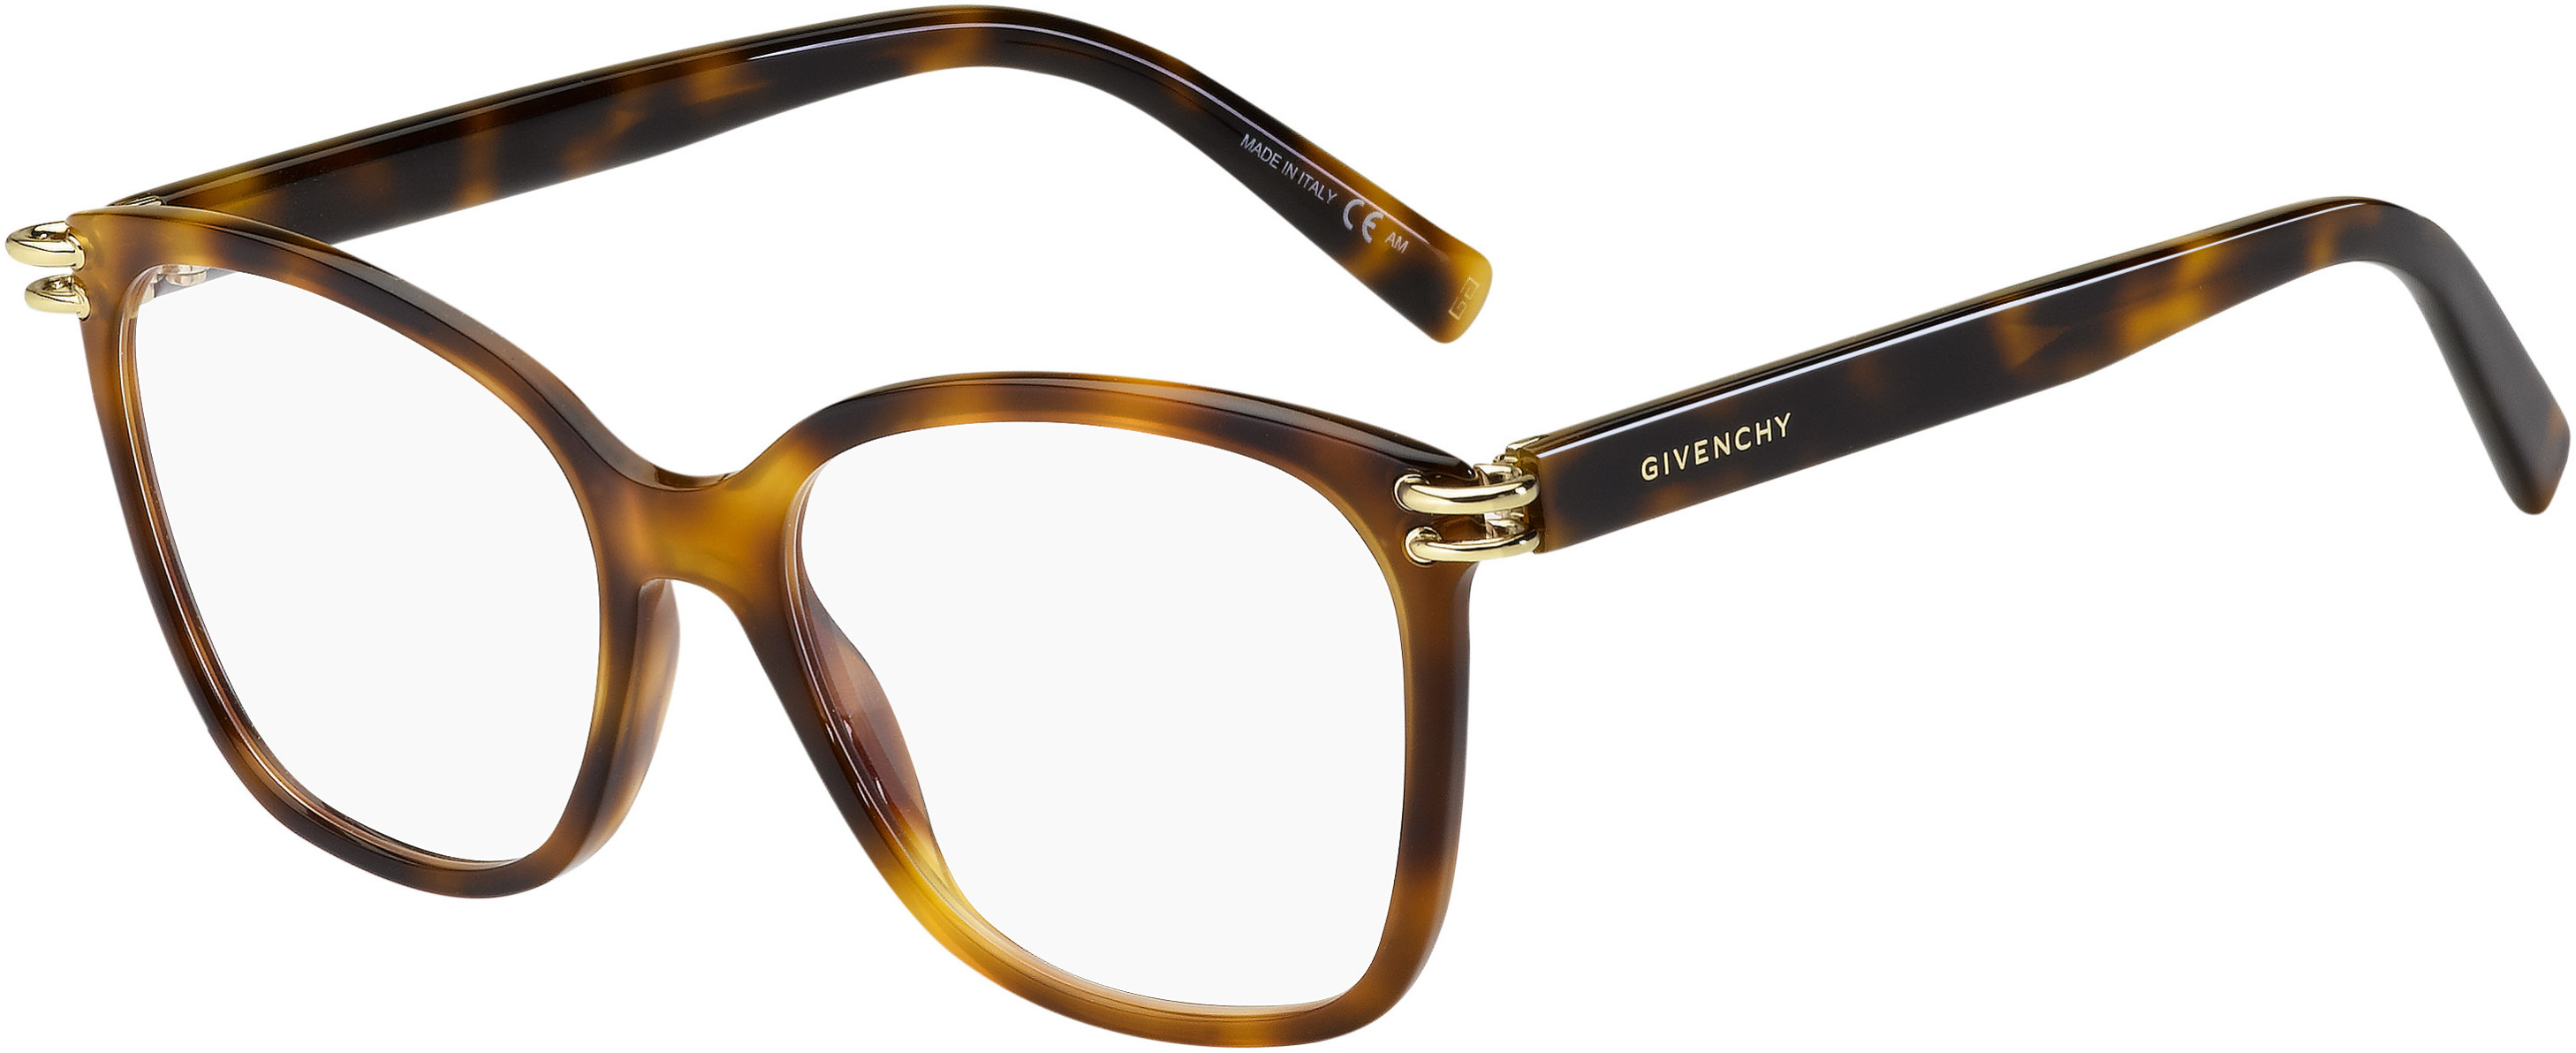 GIVENCHY 0130 WR9